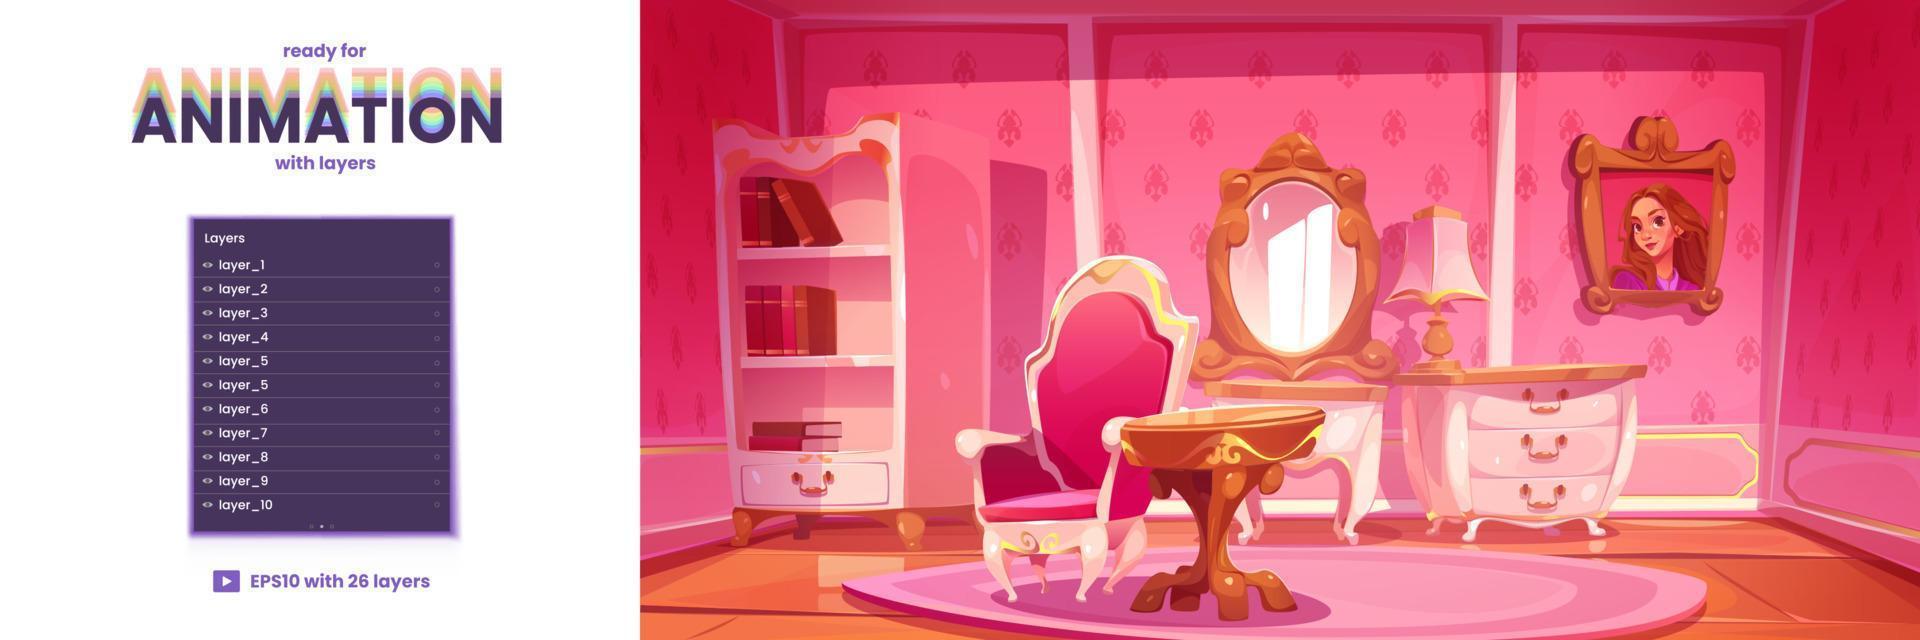 Parallax background with princess room interior vector